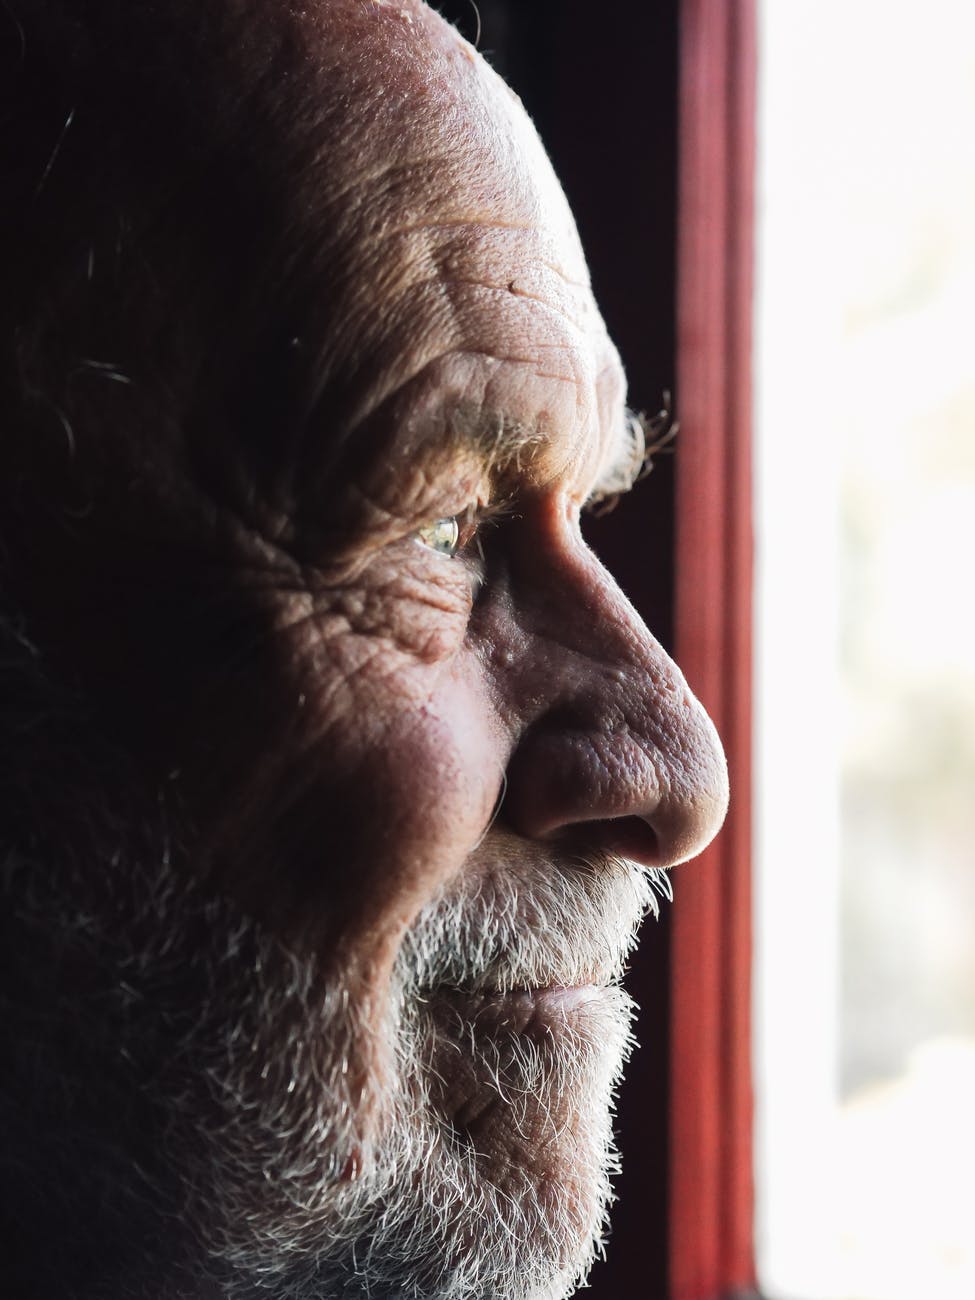 man staring out of window for how to spot the early signs of dementia post. 